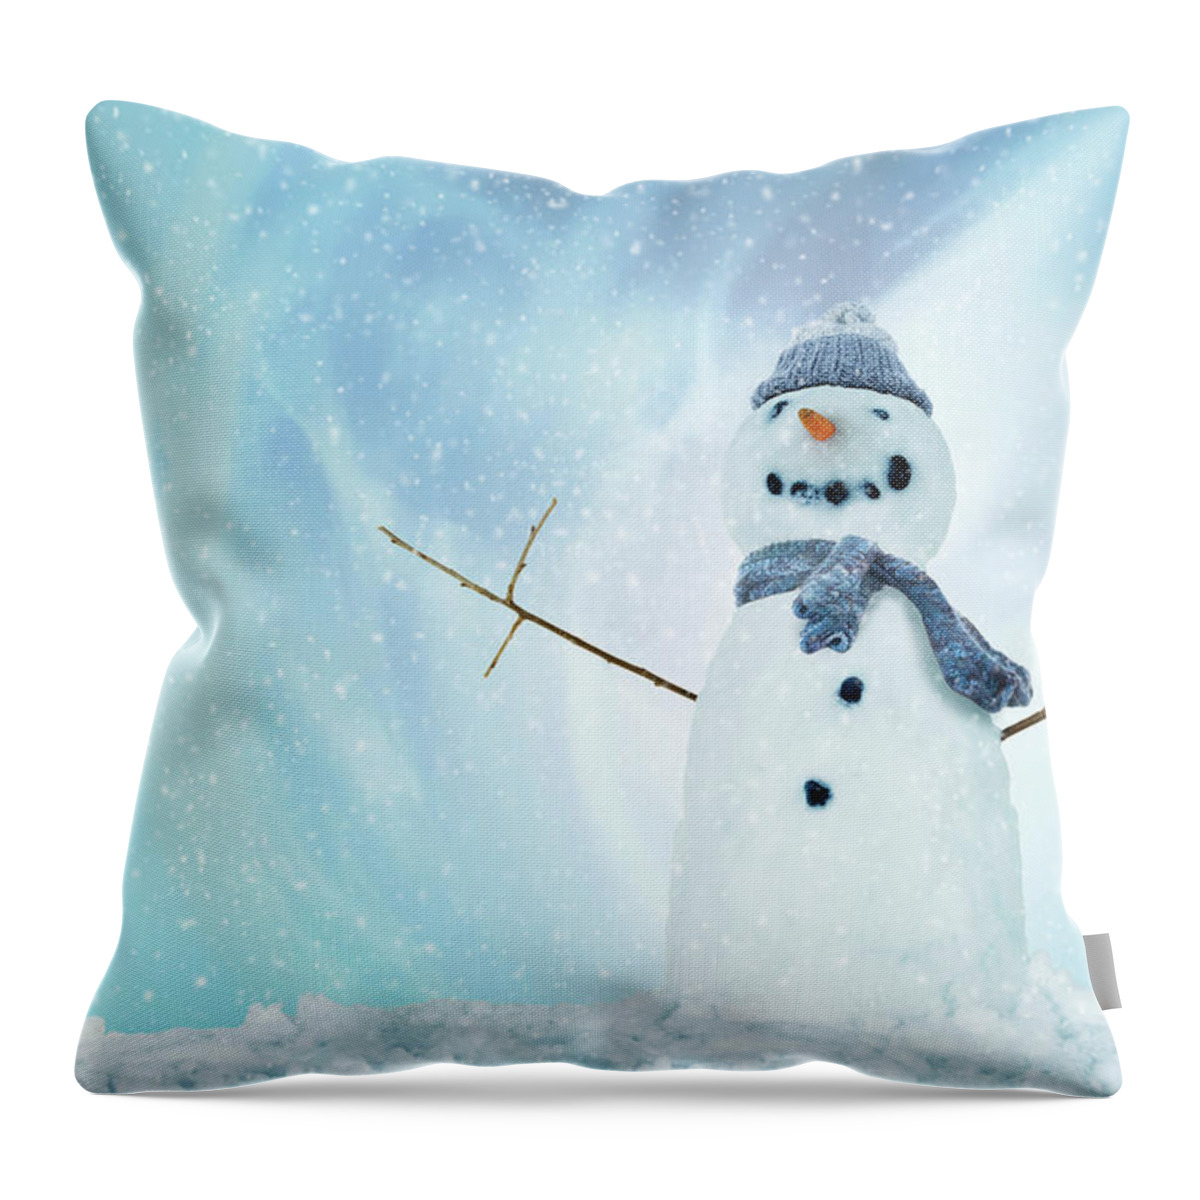 England Throw Pillow featuring the photograph Snowman With Arms Open by Gandee Vasan